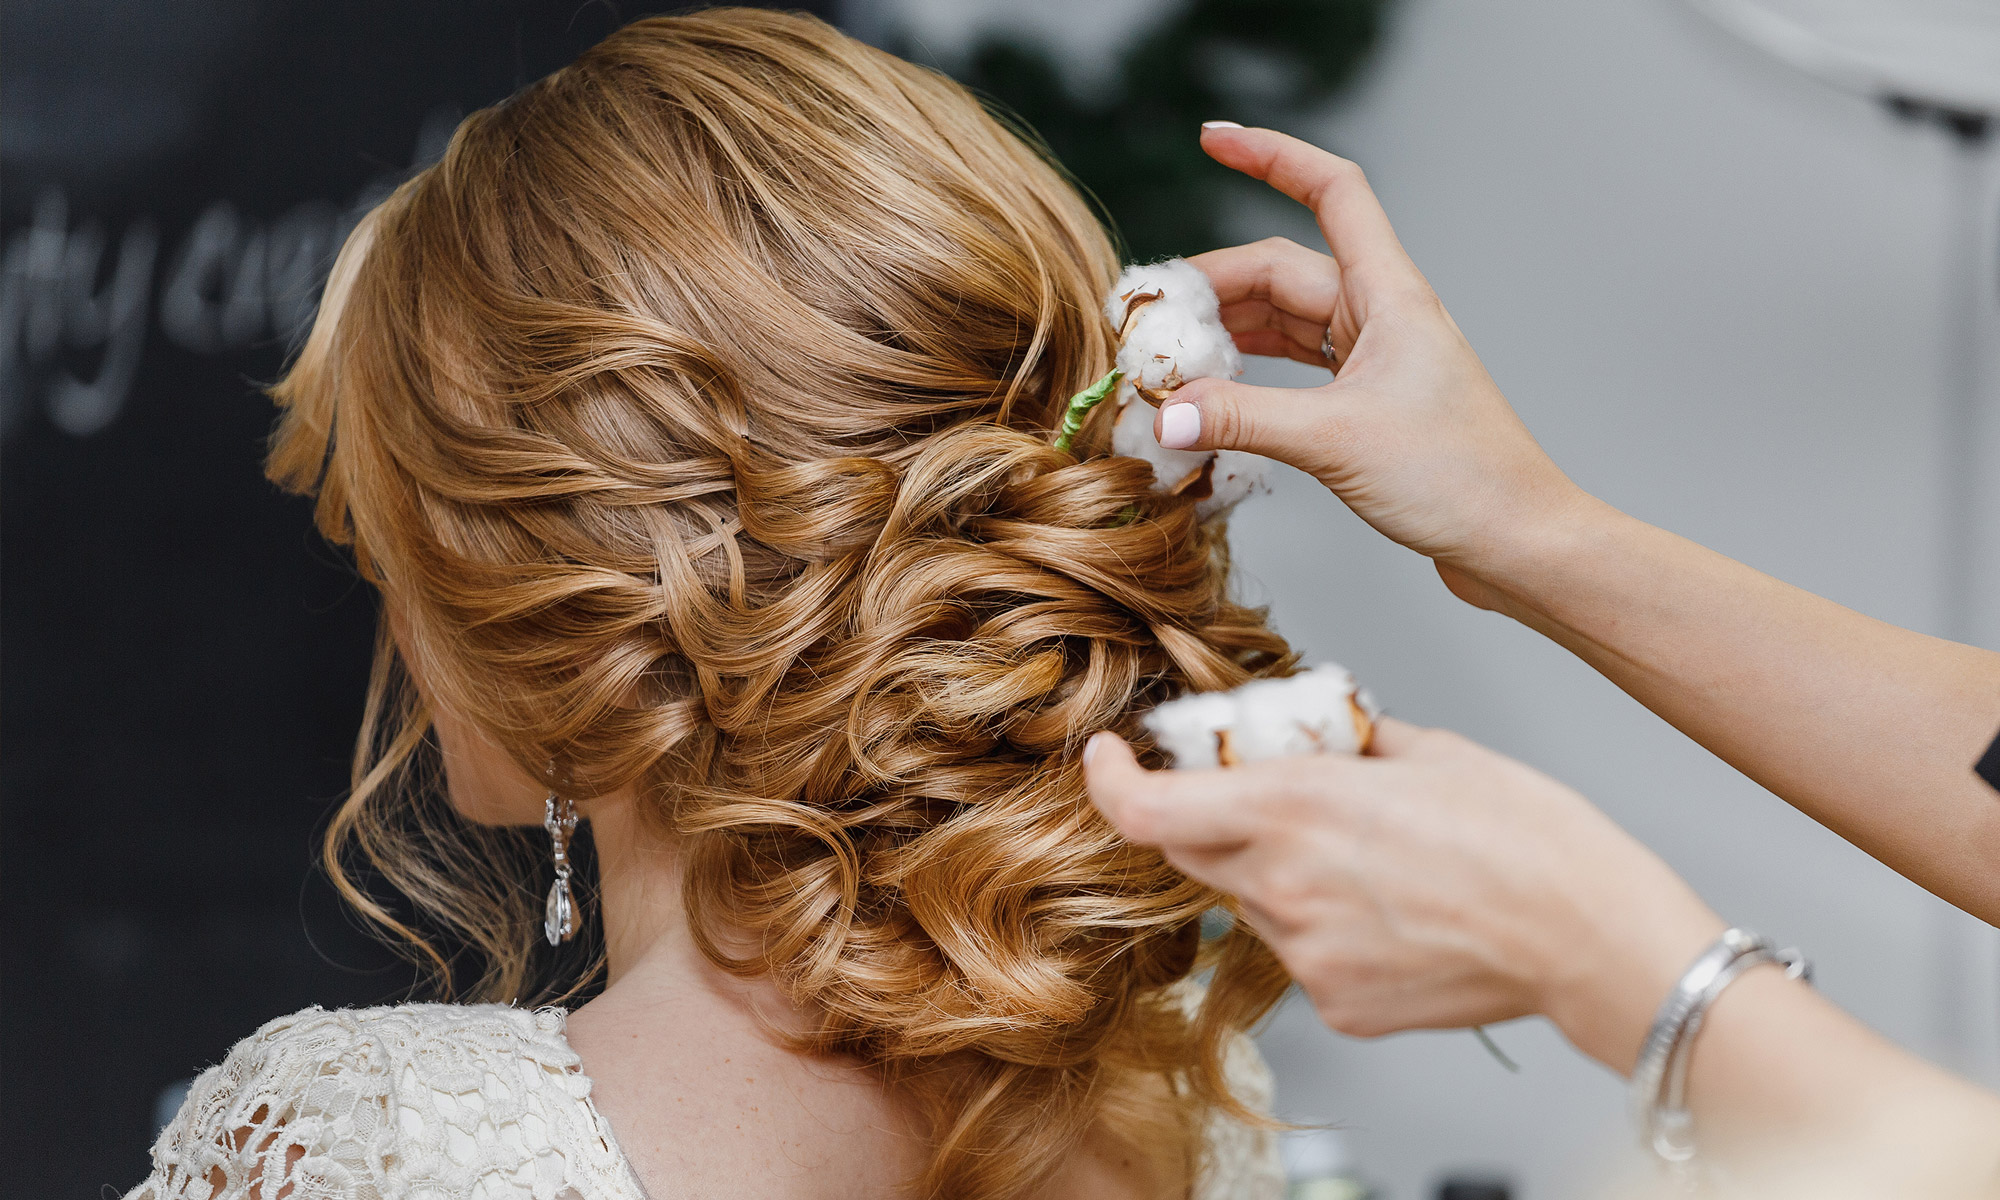 Bring in the Pros for Wedding Hair and Makeup